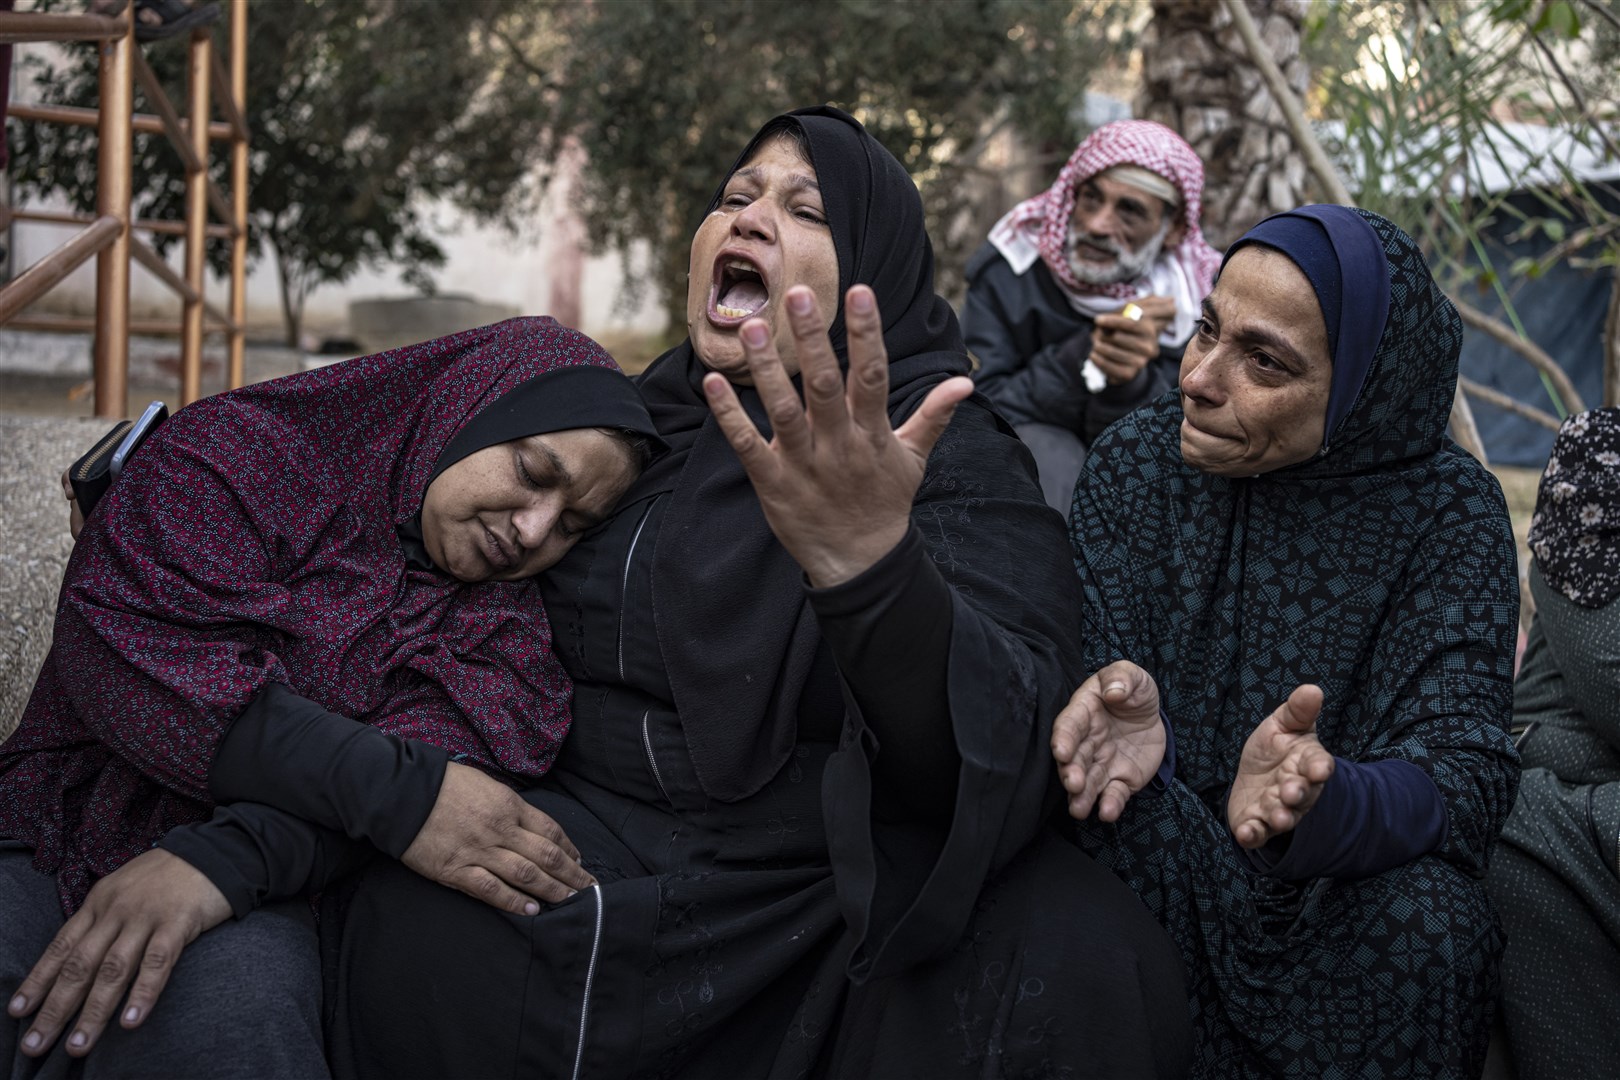 Palestinians mourn their relatives killed in the Israeli bombardment of the Gaza Strip on Saturday (Fatima Shbair/AP/PA)